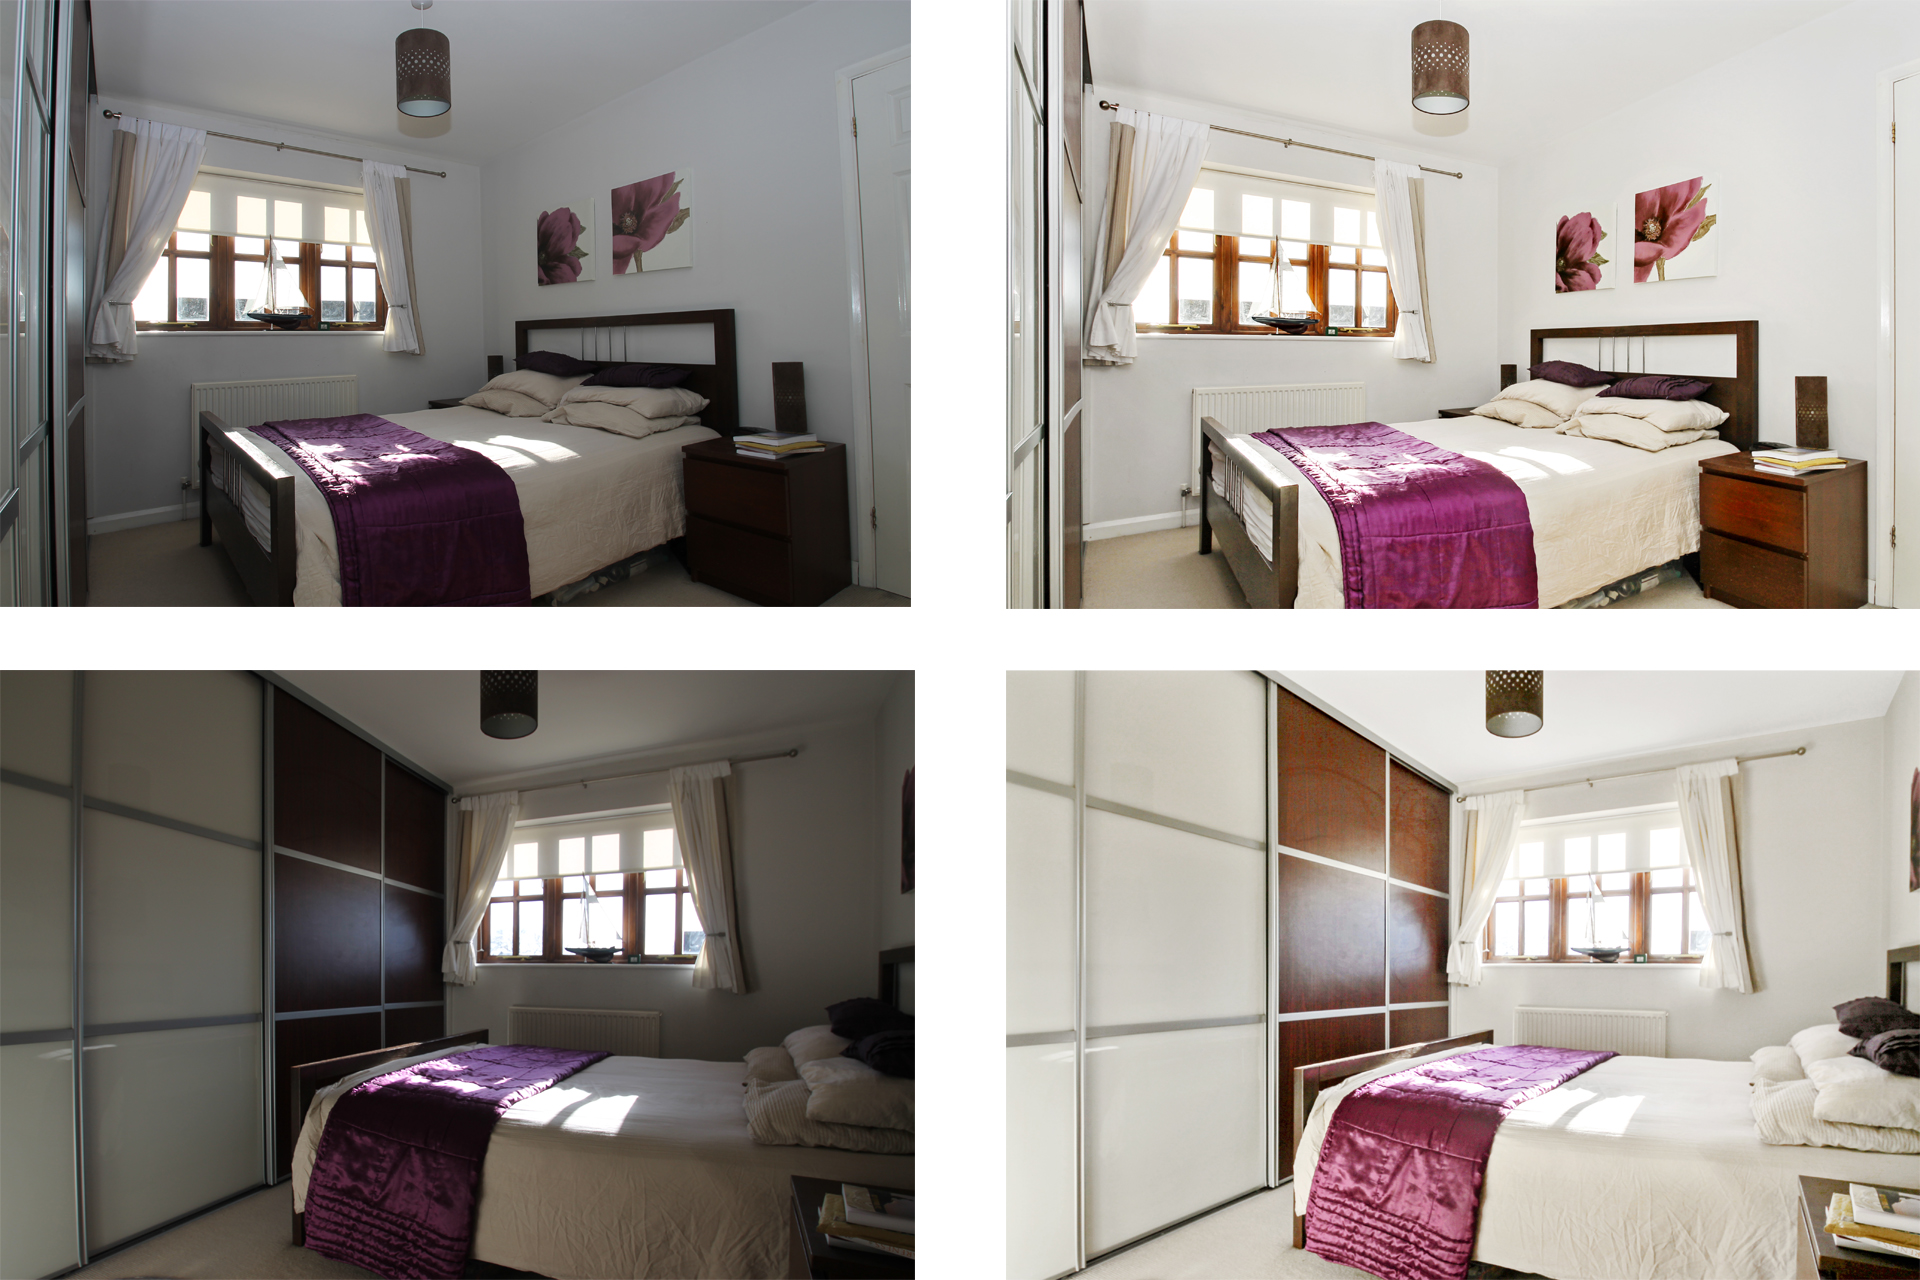 Real Estate Image Editing Services